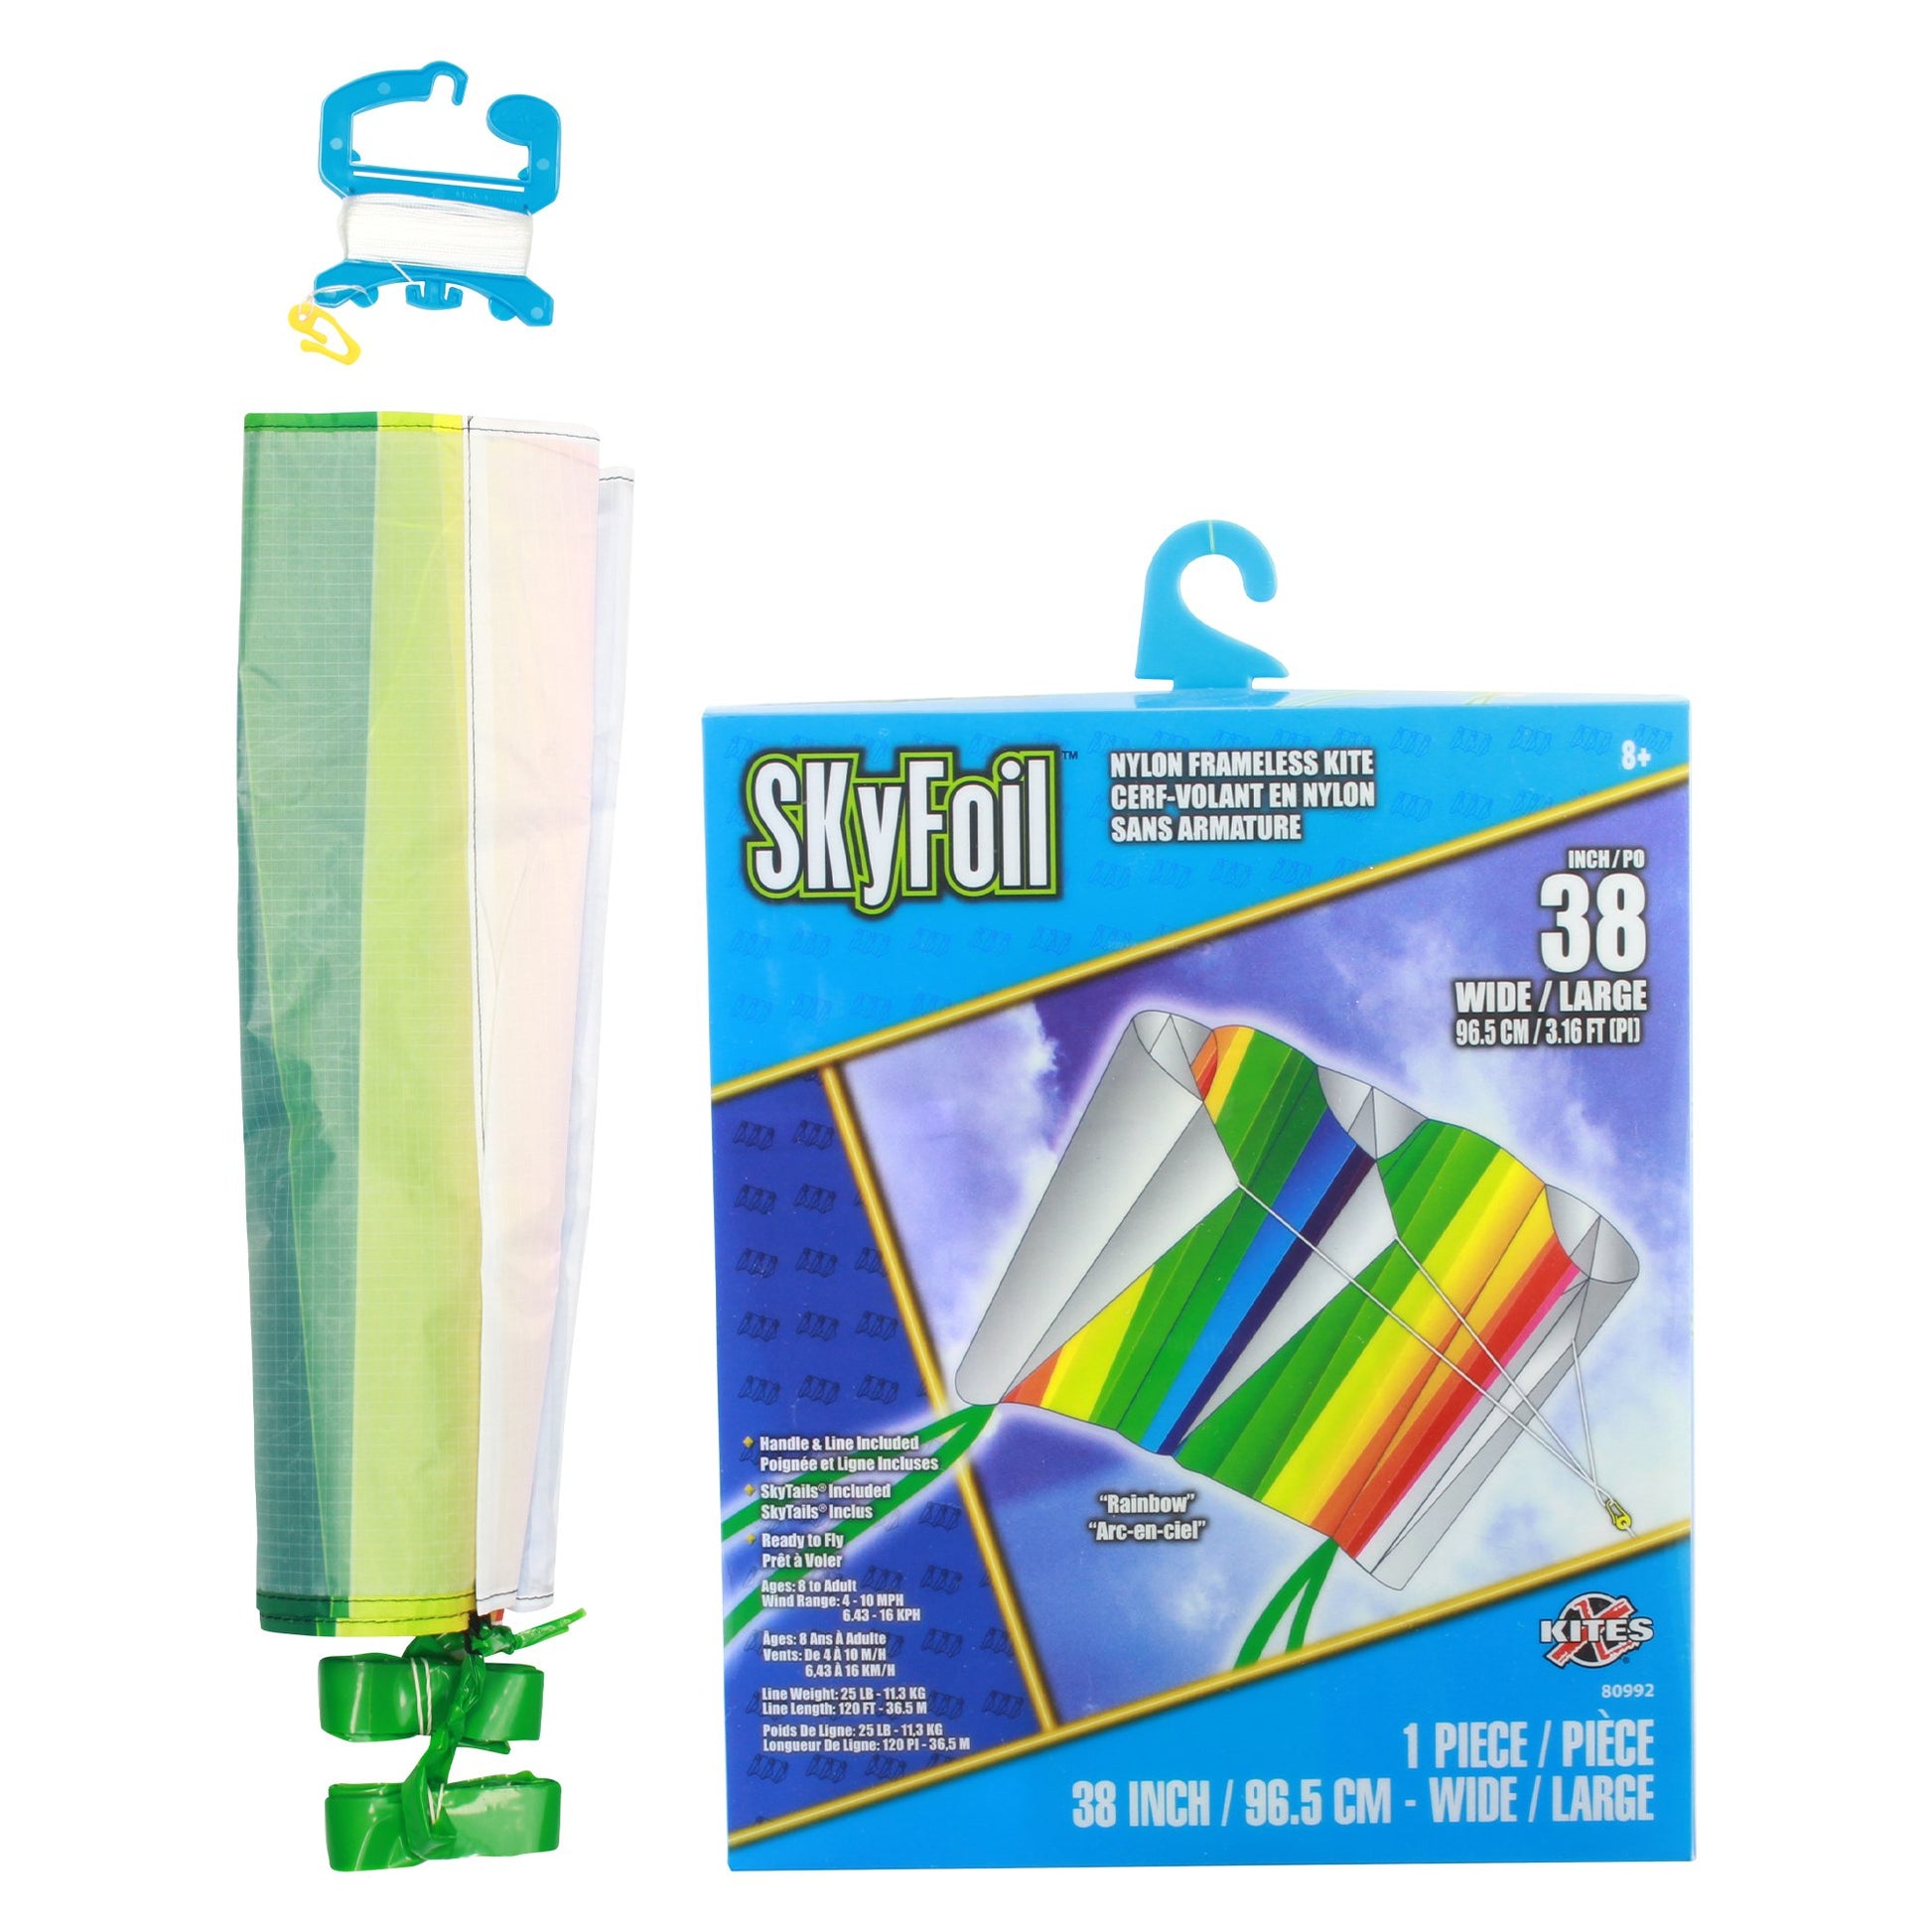 X Kites SkyFoil Rainbow Nylon Kite packaging and contents